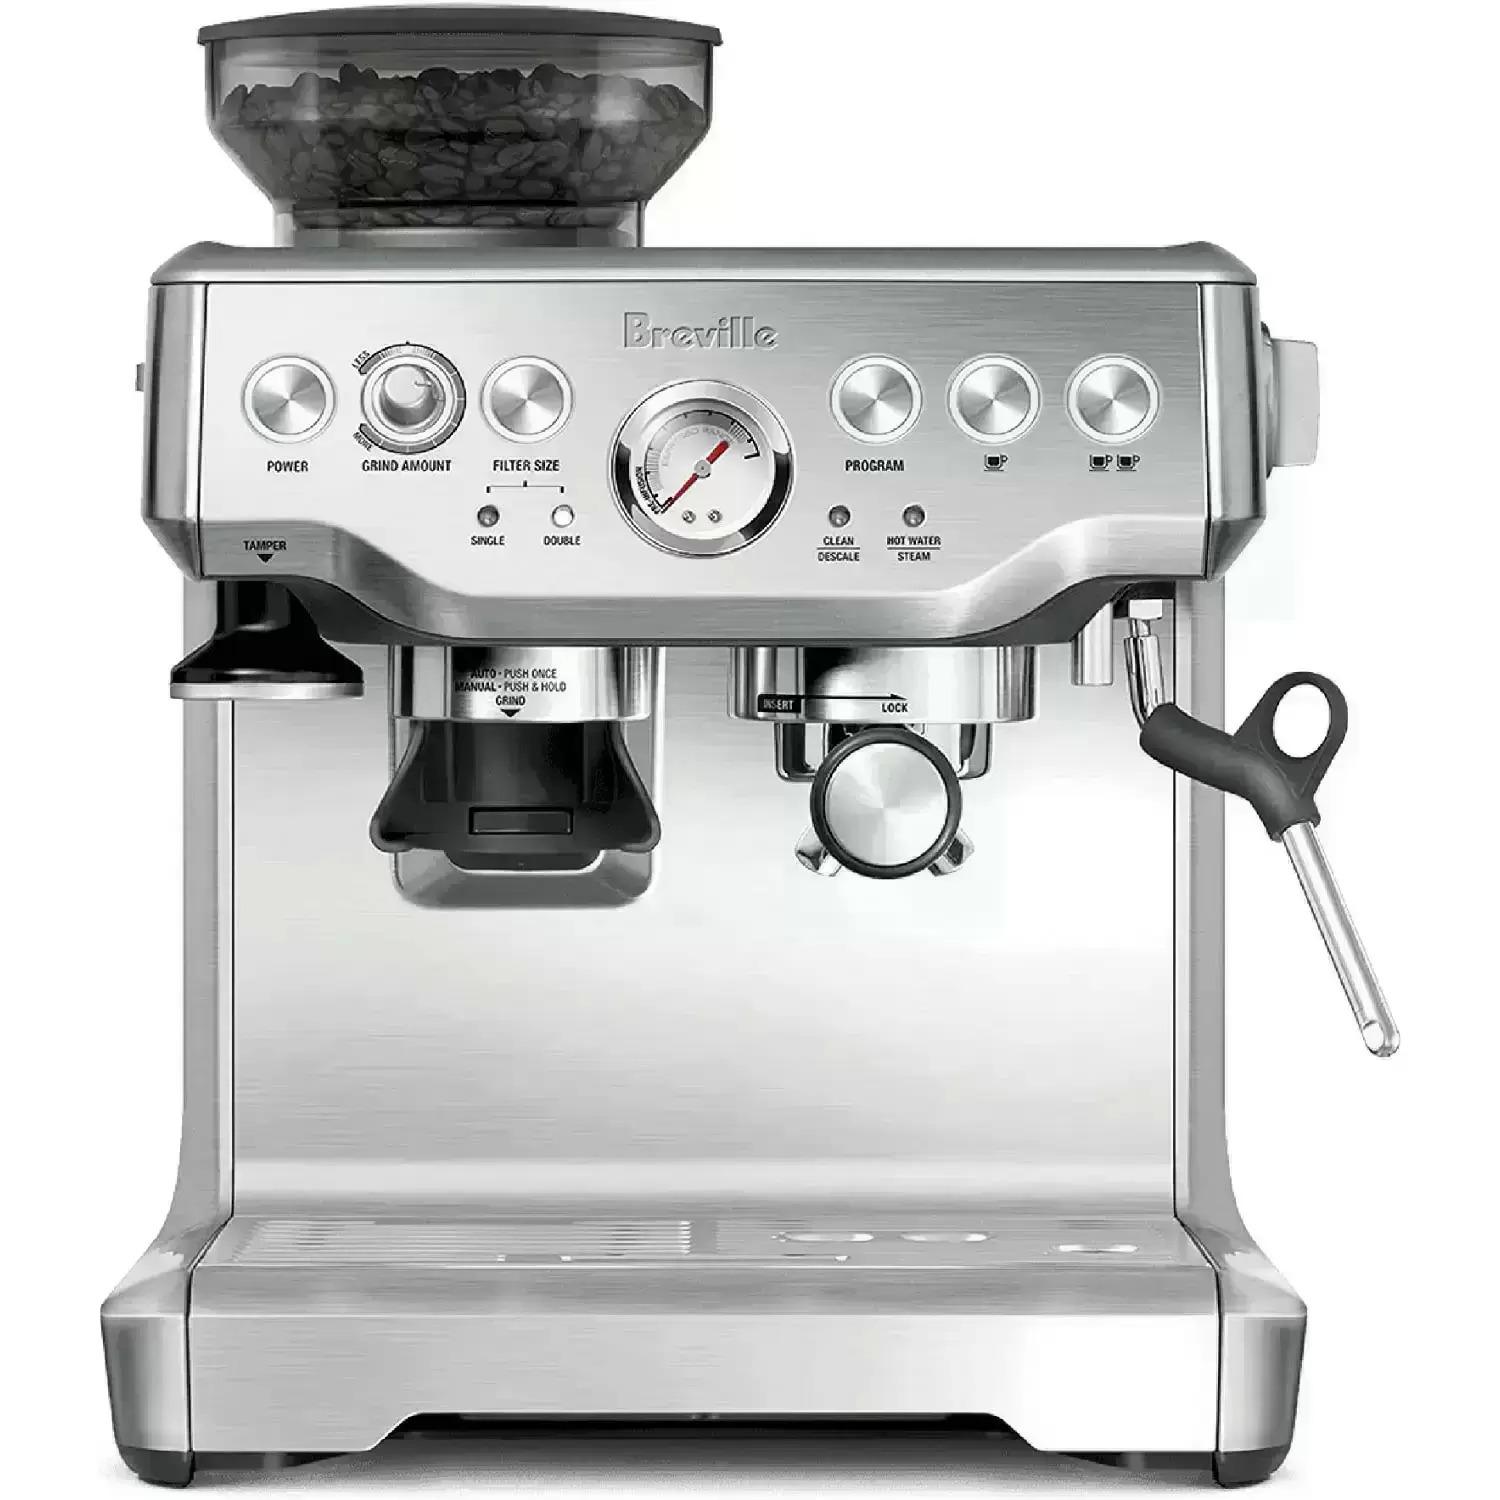 Breville BES870XL Barista Express Espresso Machine for $559.99 Shipped